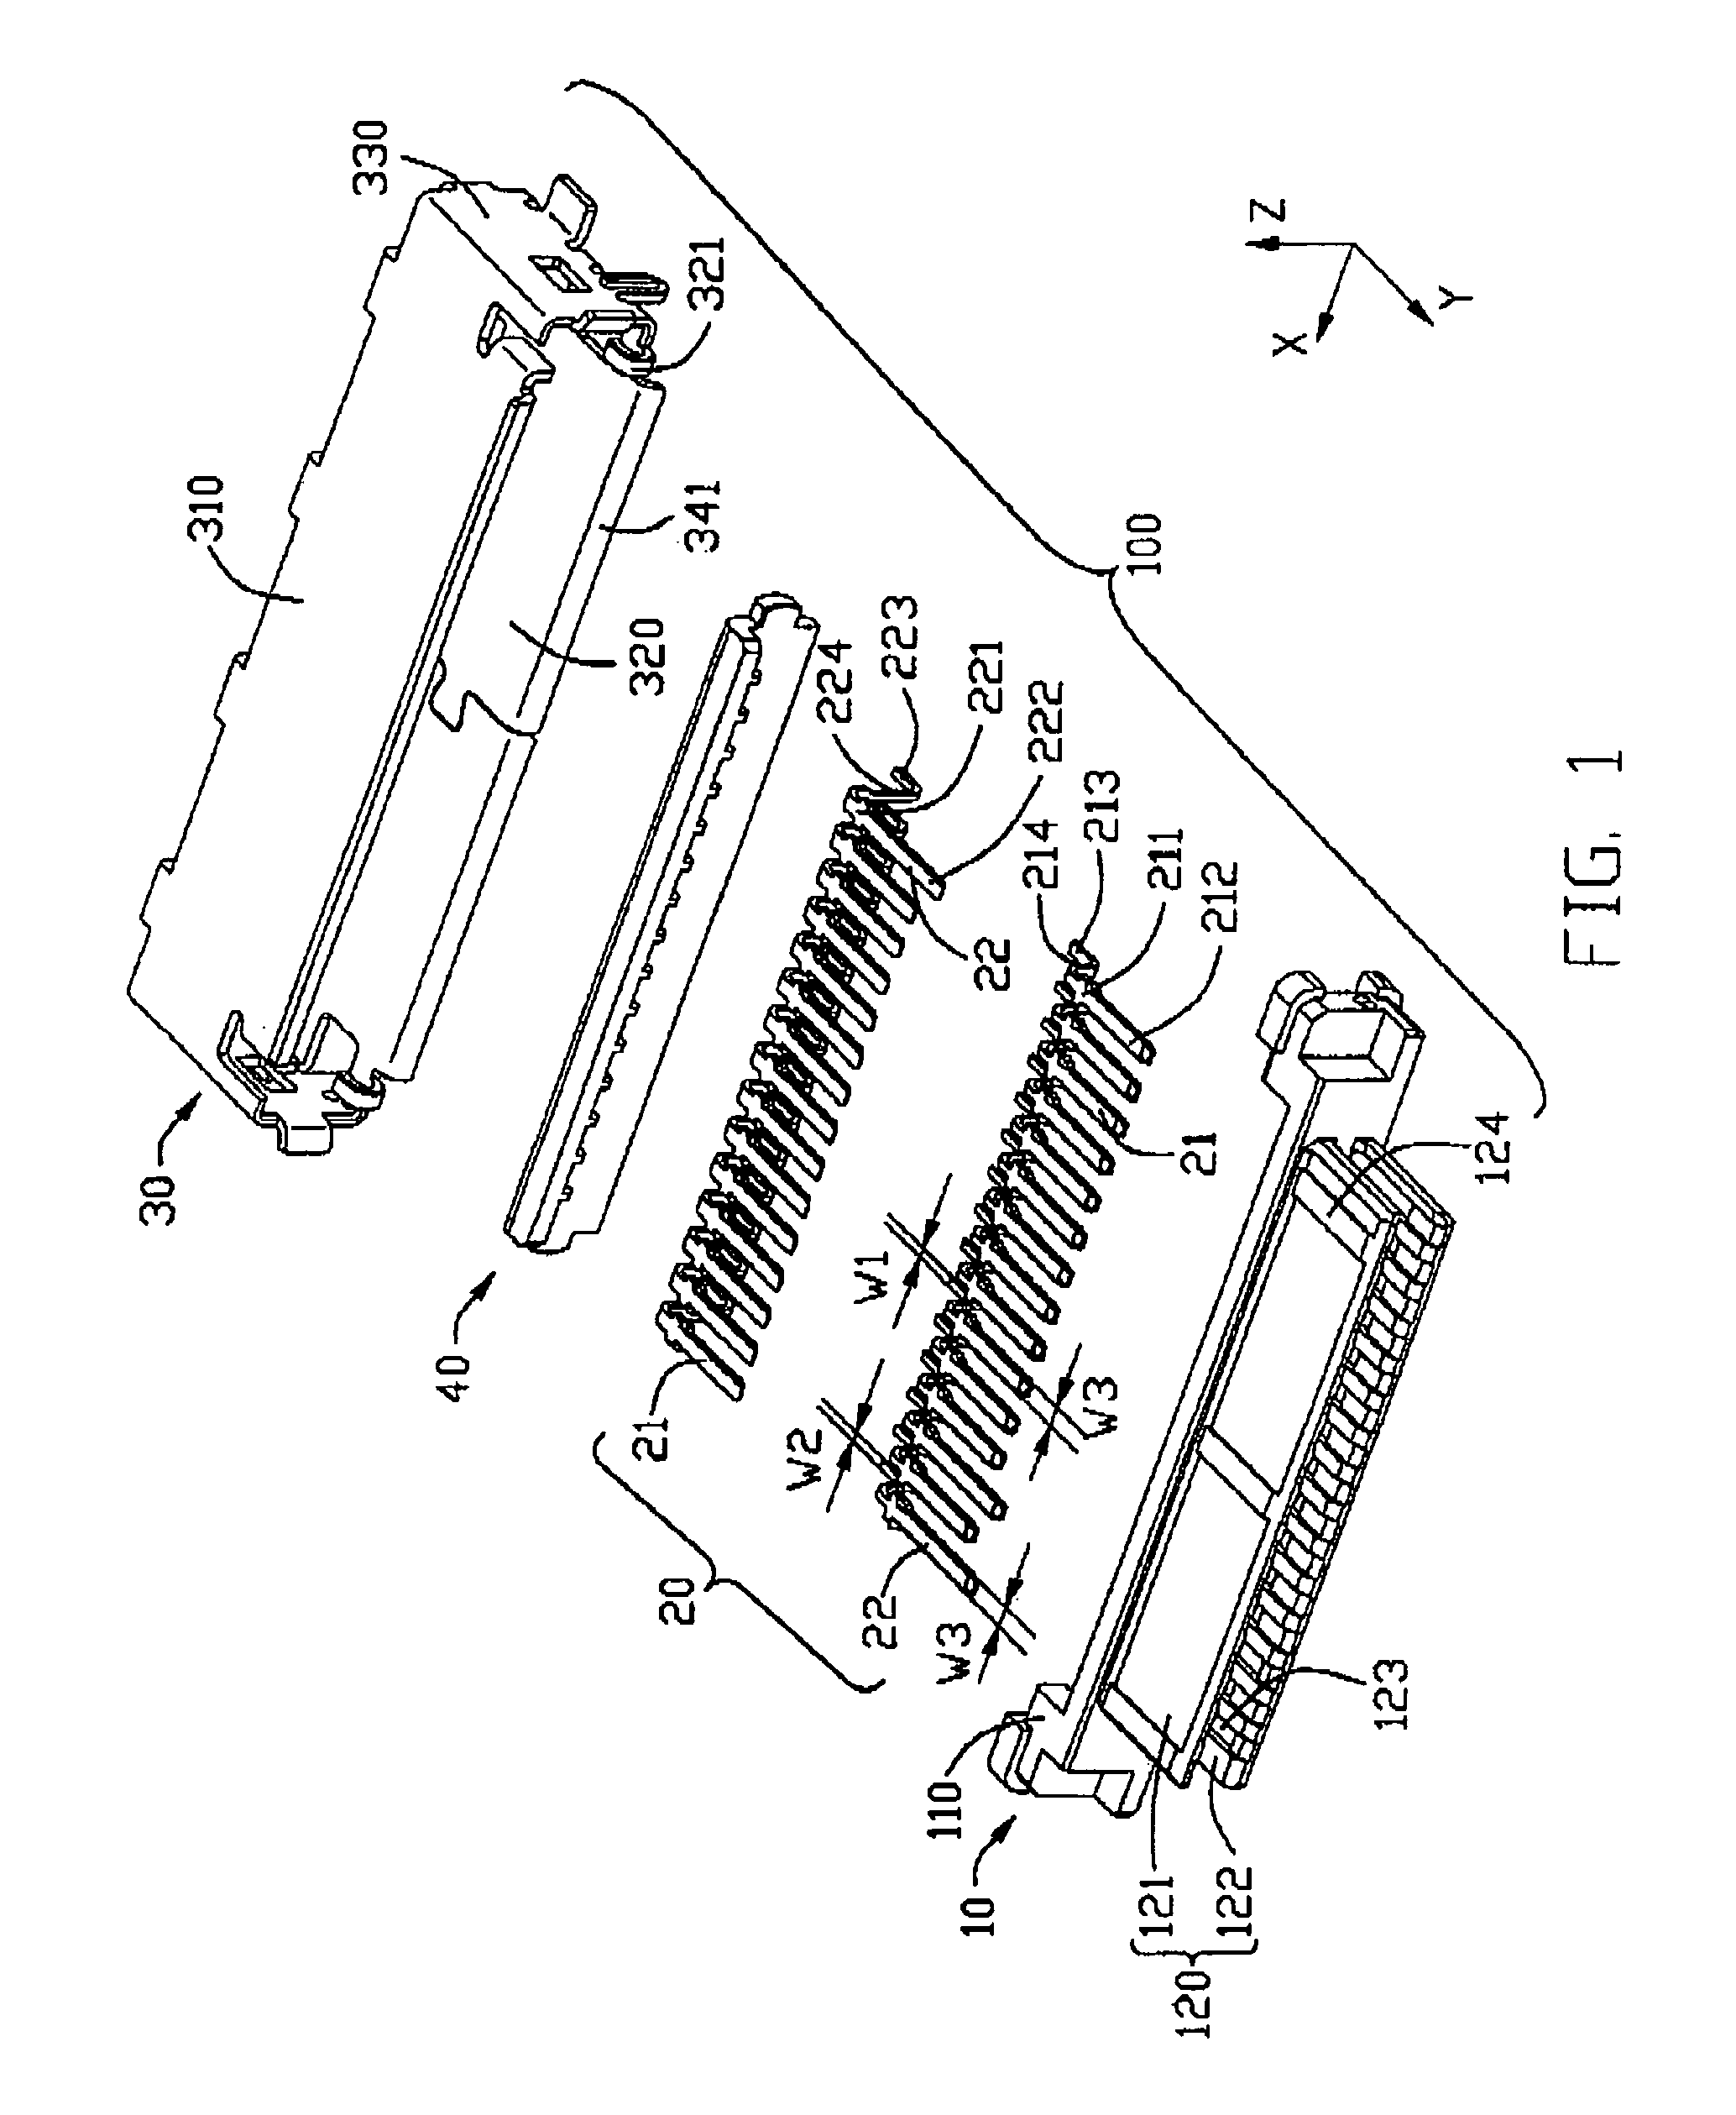 Electrical connector with improved contact